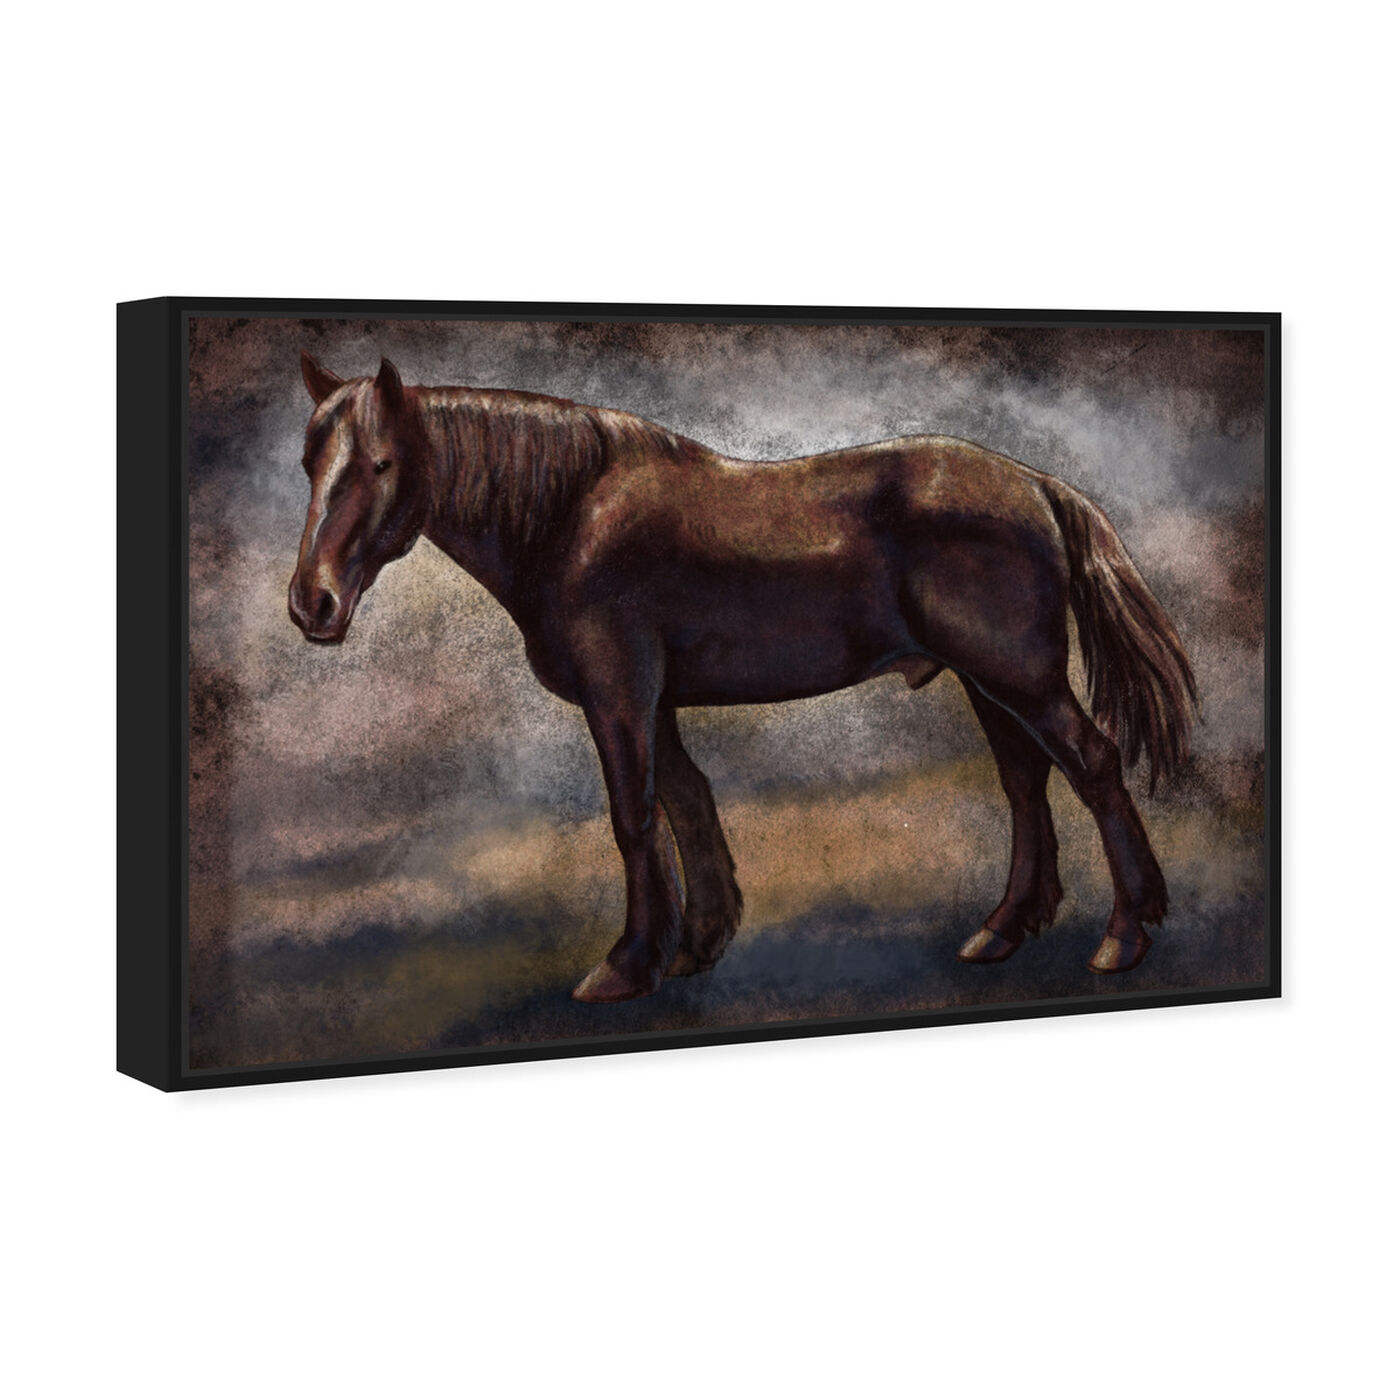 Angled view of Brown Horse featuring animals and farm animals art.